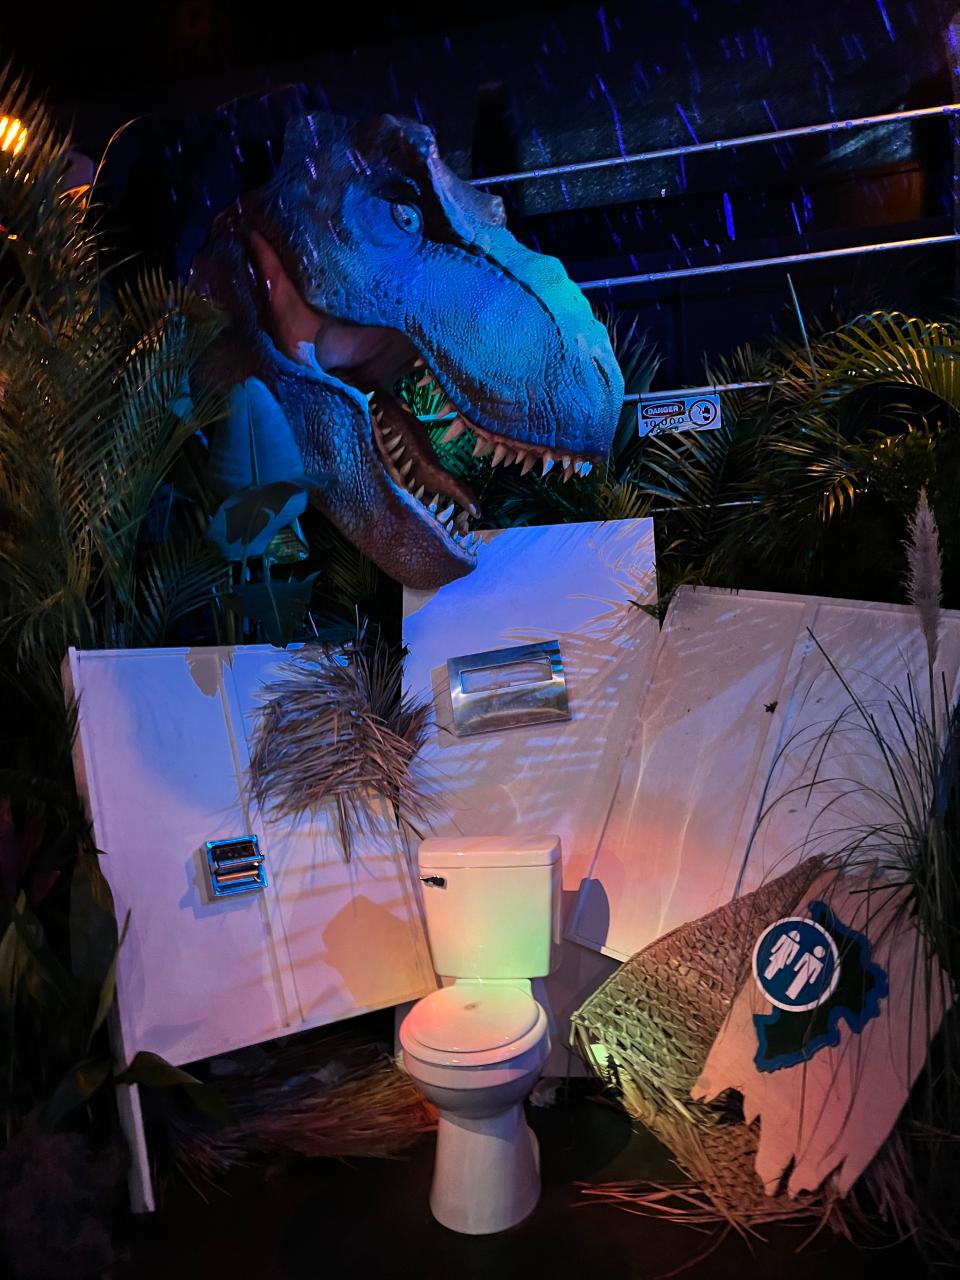 Universal Orlando’s Visual Merchandising and Store Design team members create photo opps when they fit within a story, like this Jurassic Park scene from last summer’s Tribute Store. Other times, the entire store may be treated as one large photo opp.